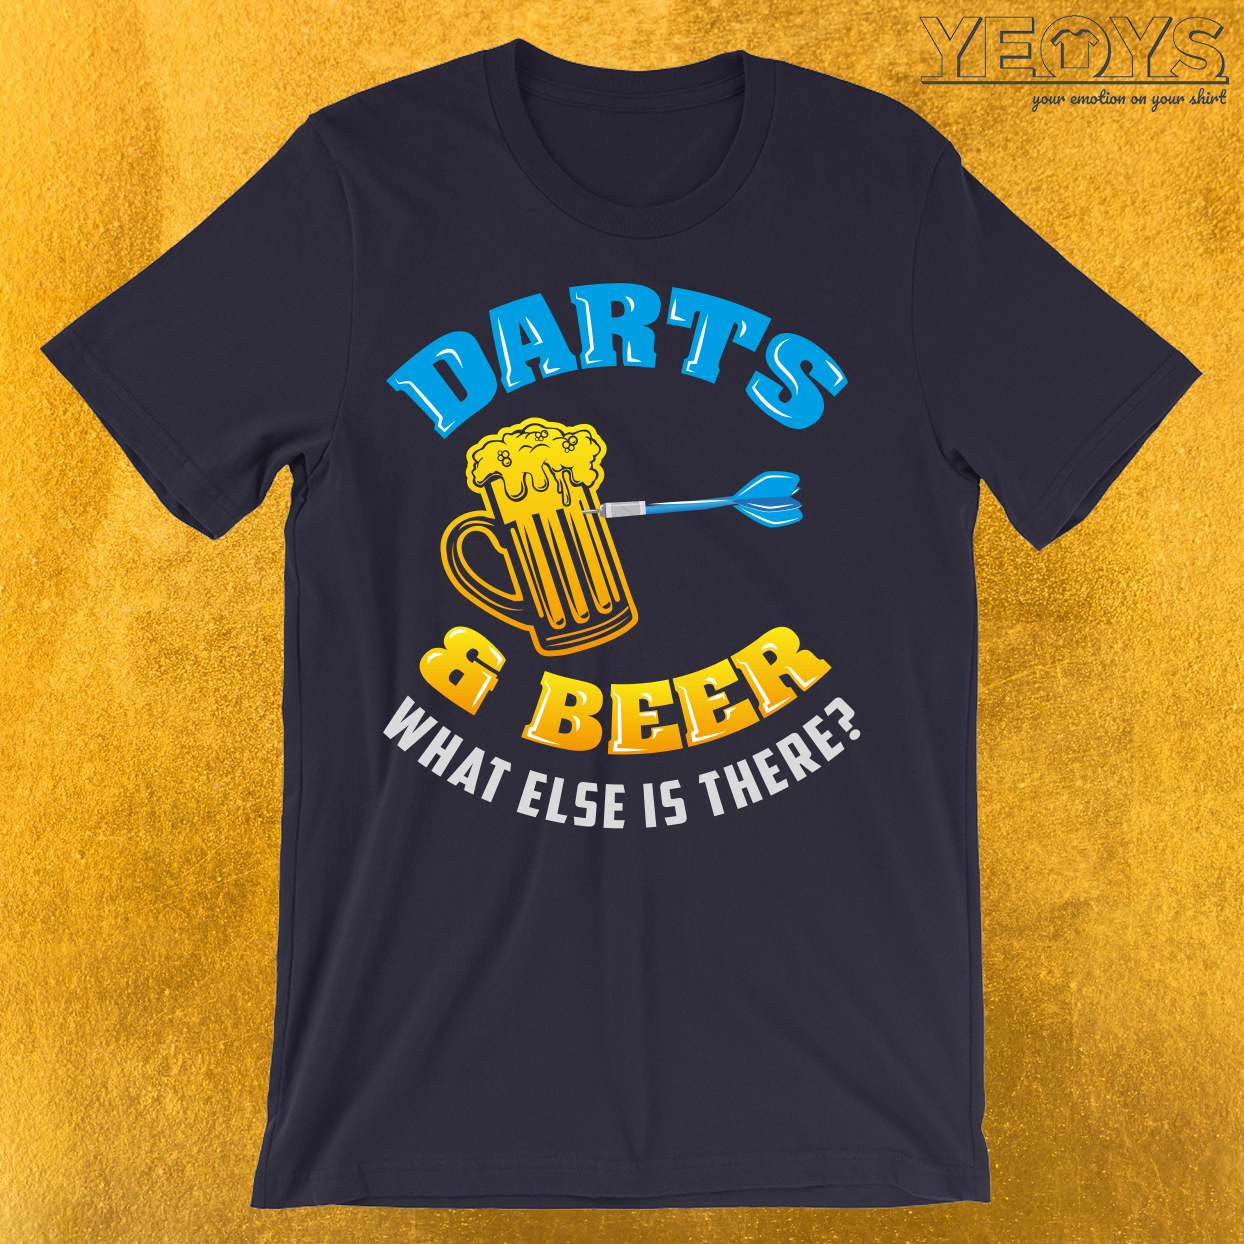 Darts & Beer What Else Is There? T-Shirt